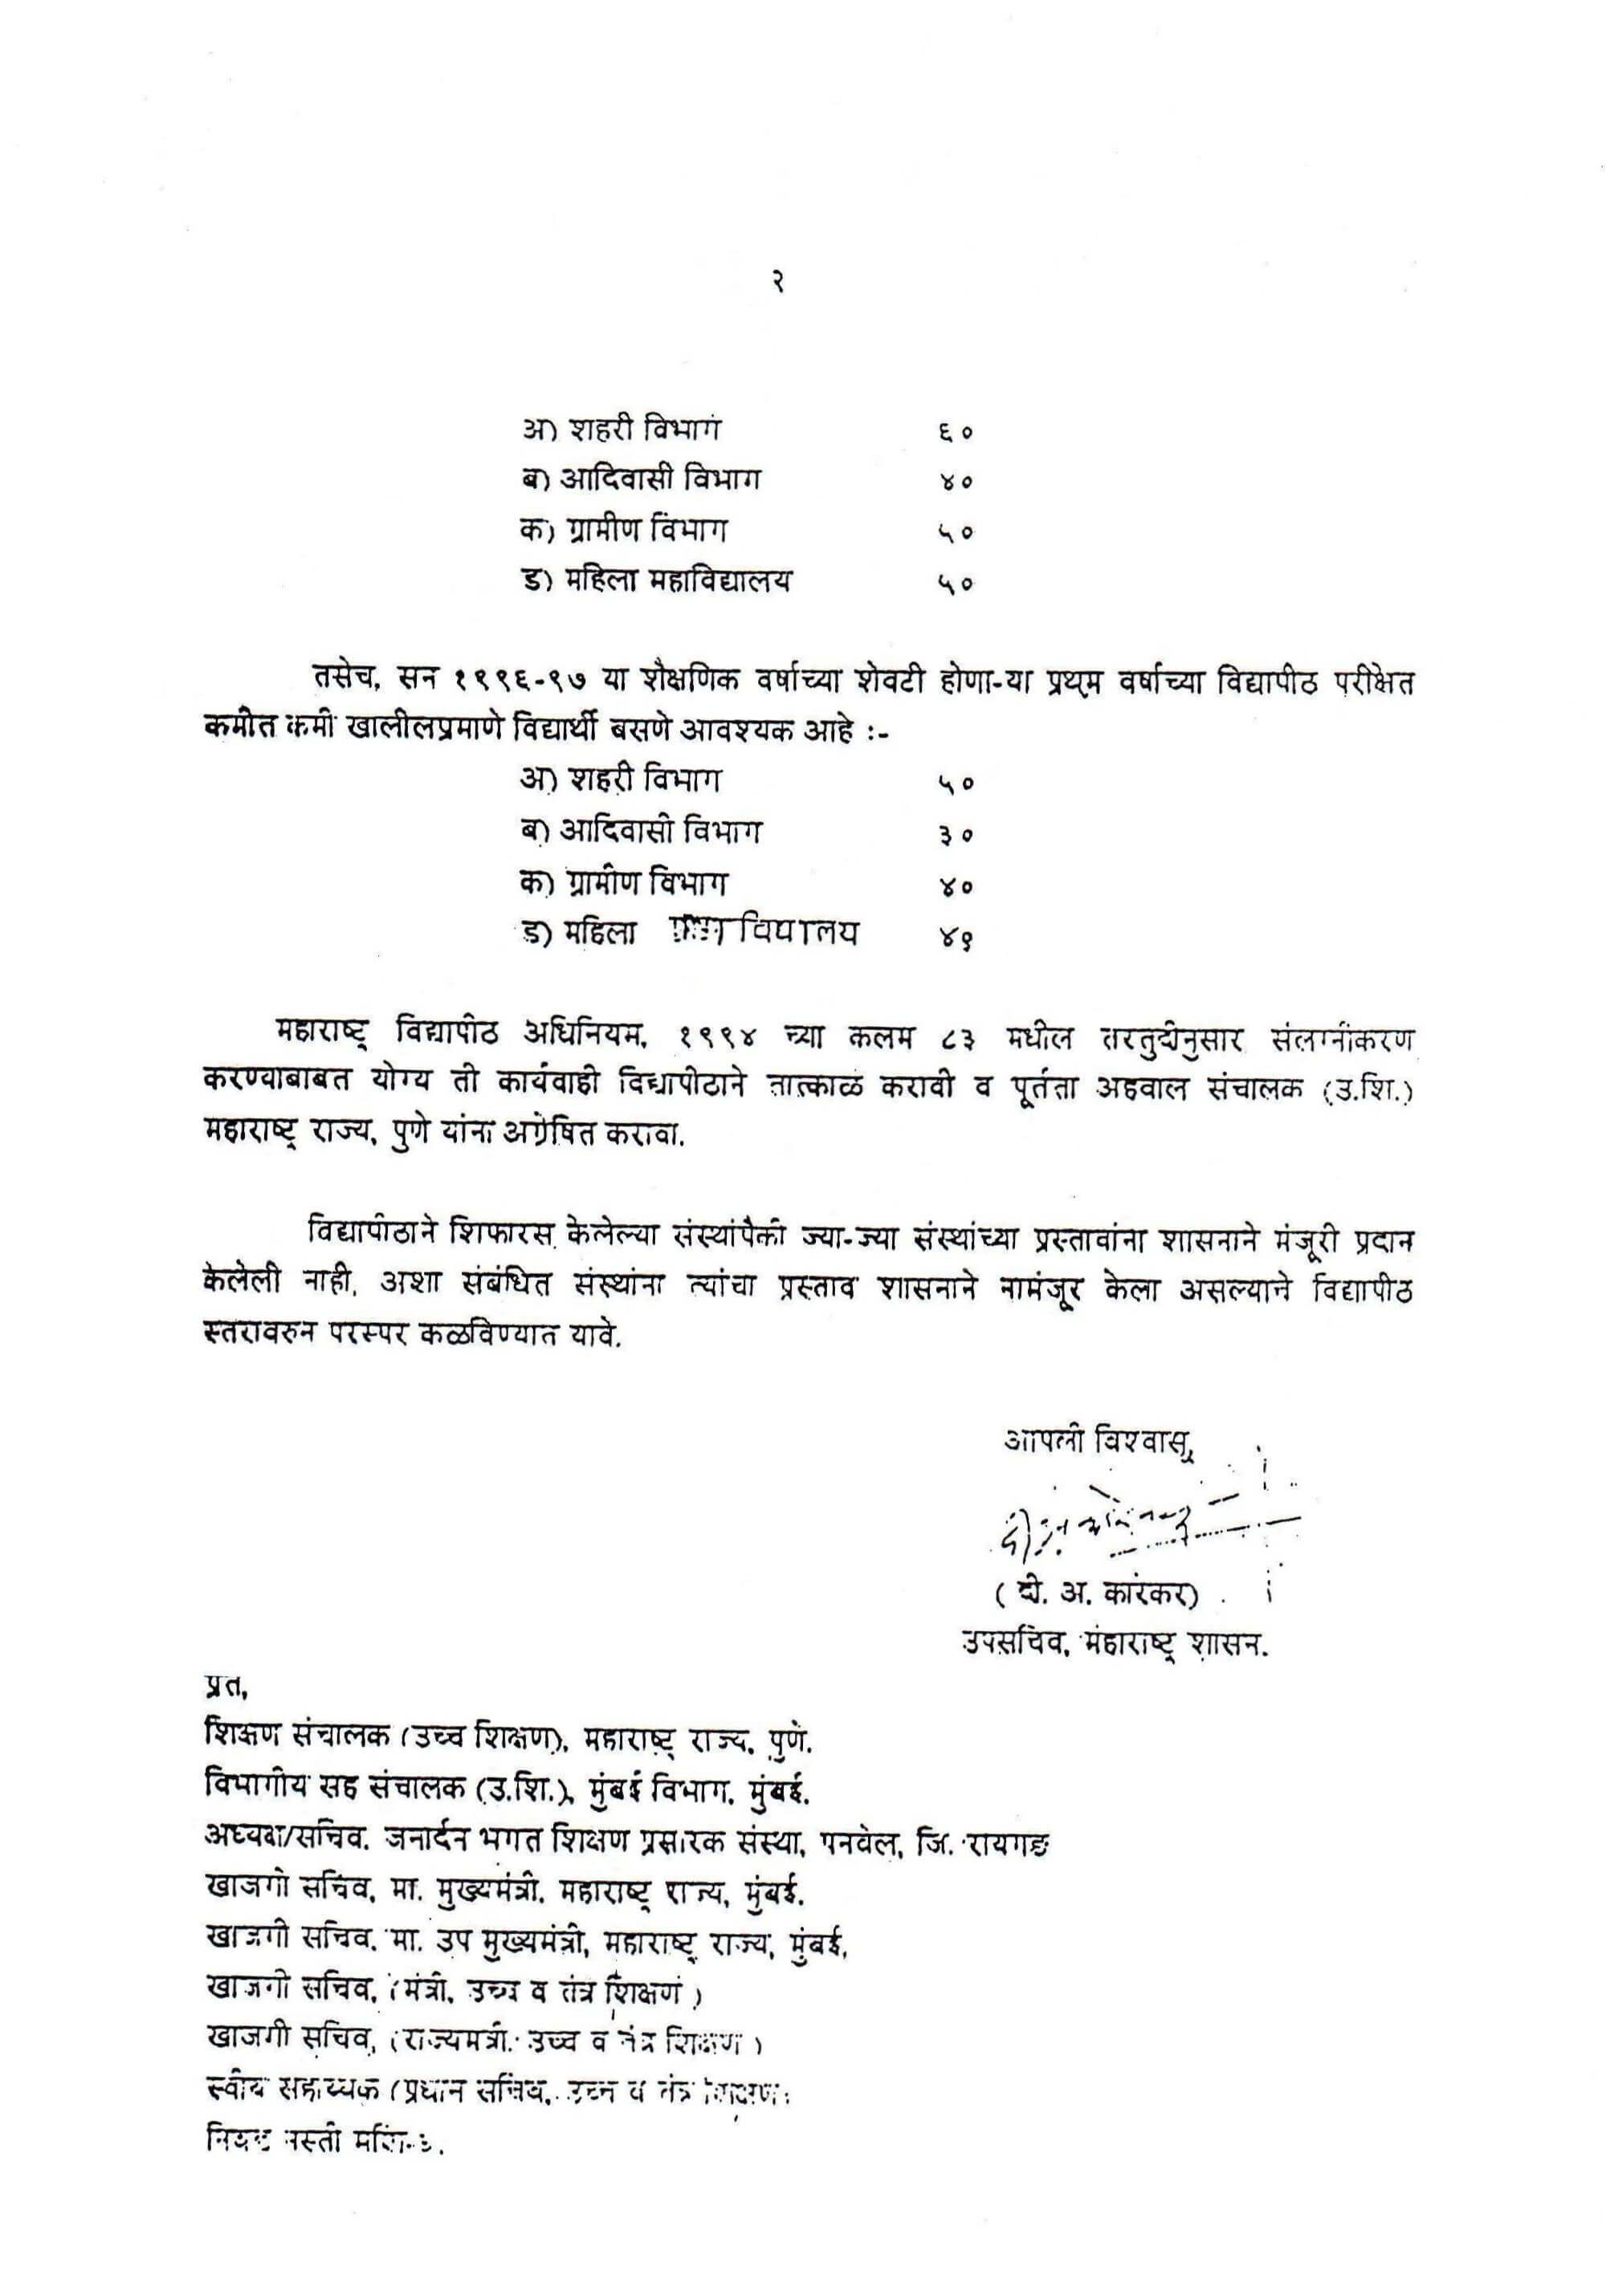 Permission Letter by Government of Maharashtra